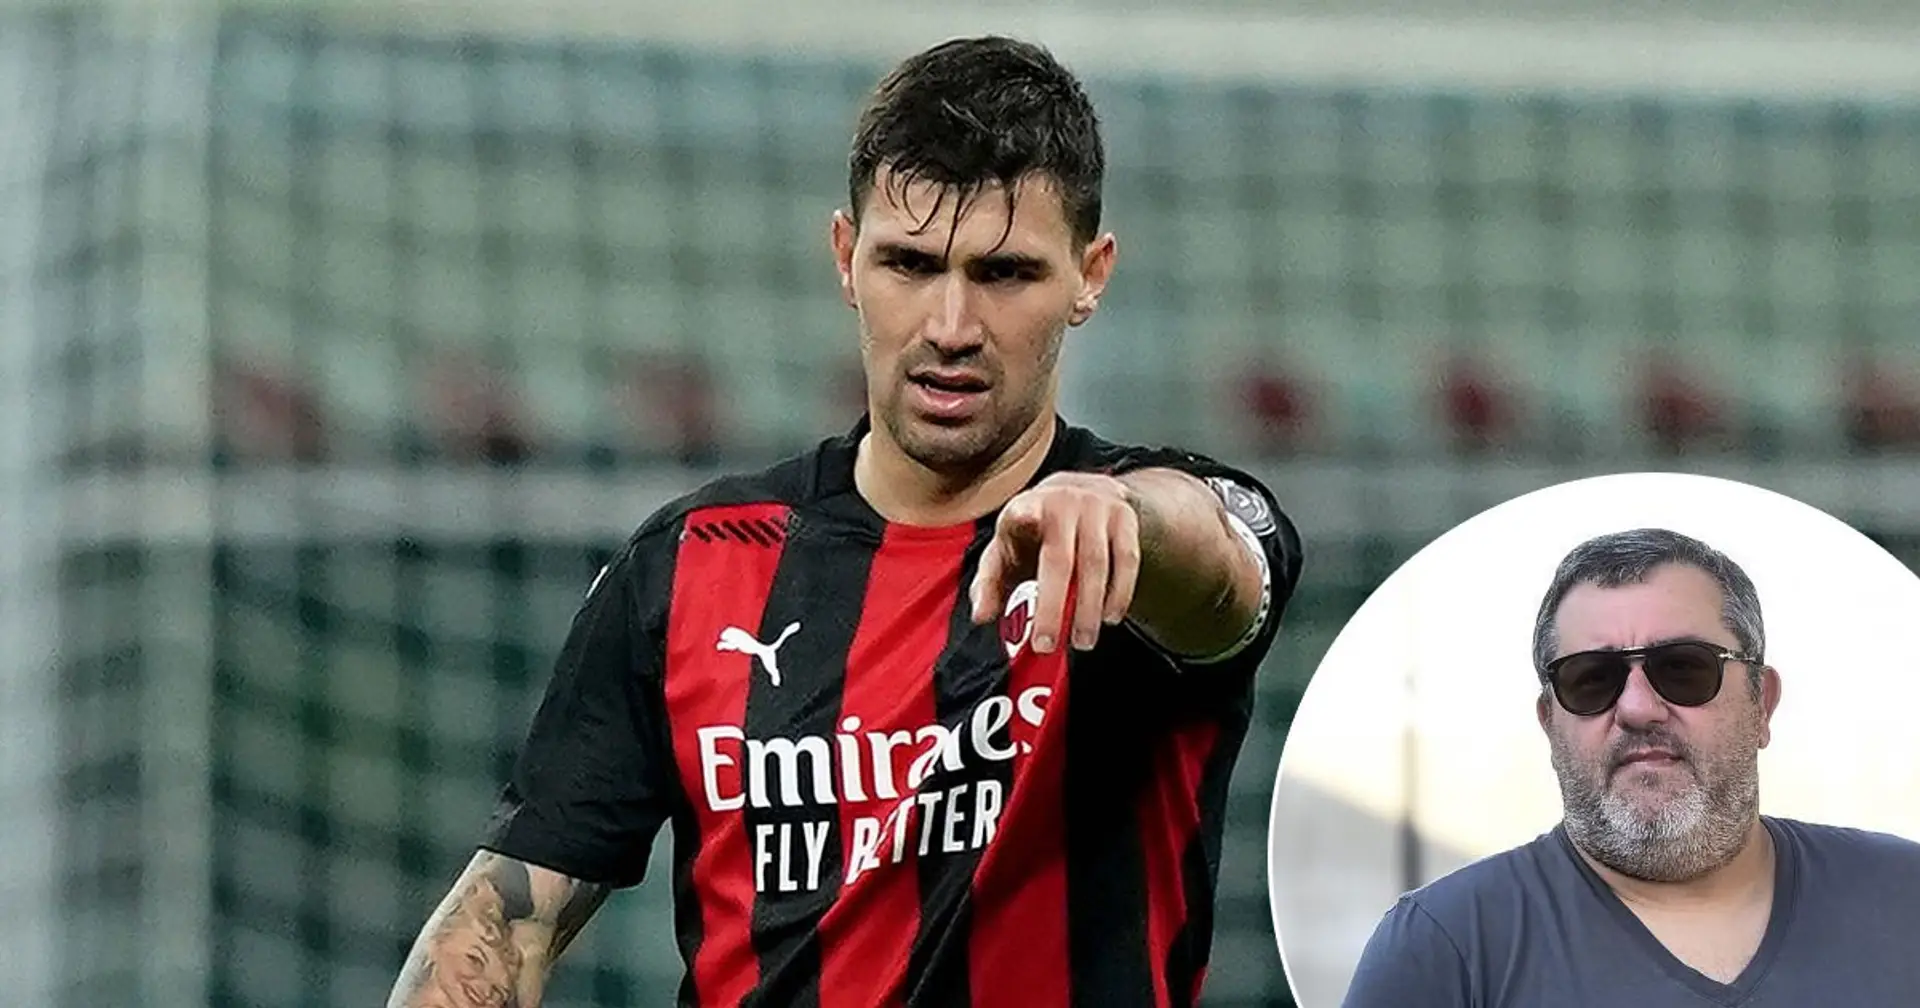 Milan defender Romagnoli offered to Barca by his agent (reliability: 3 stars)